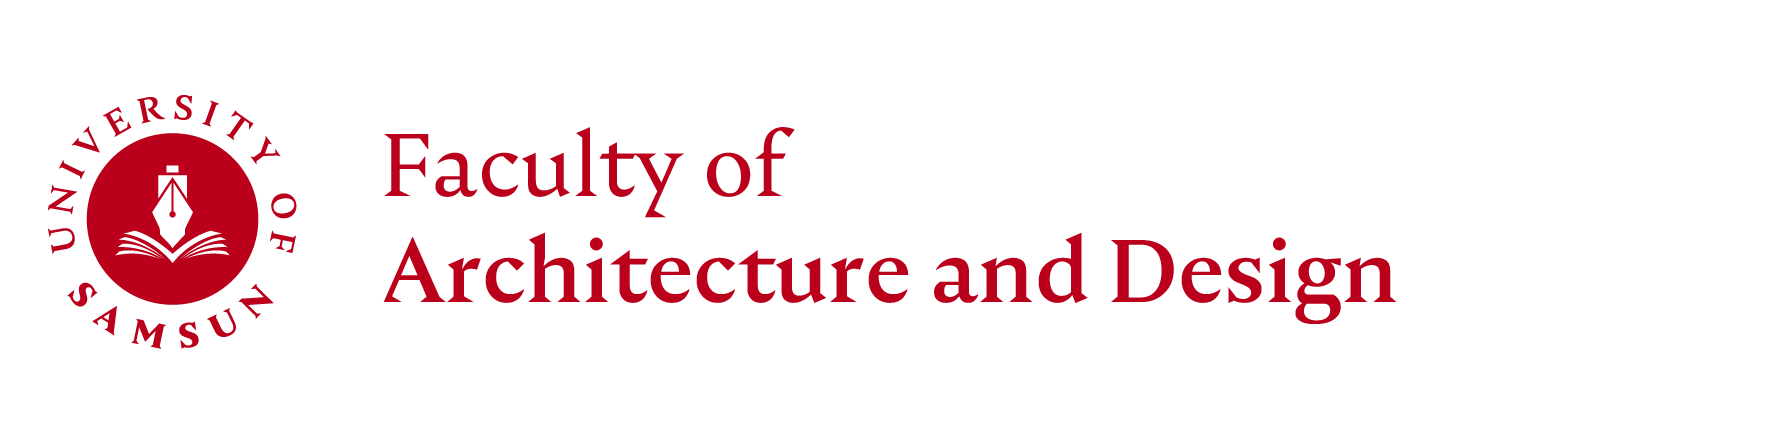 Architecture and Design Faculty